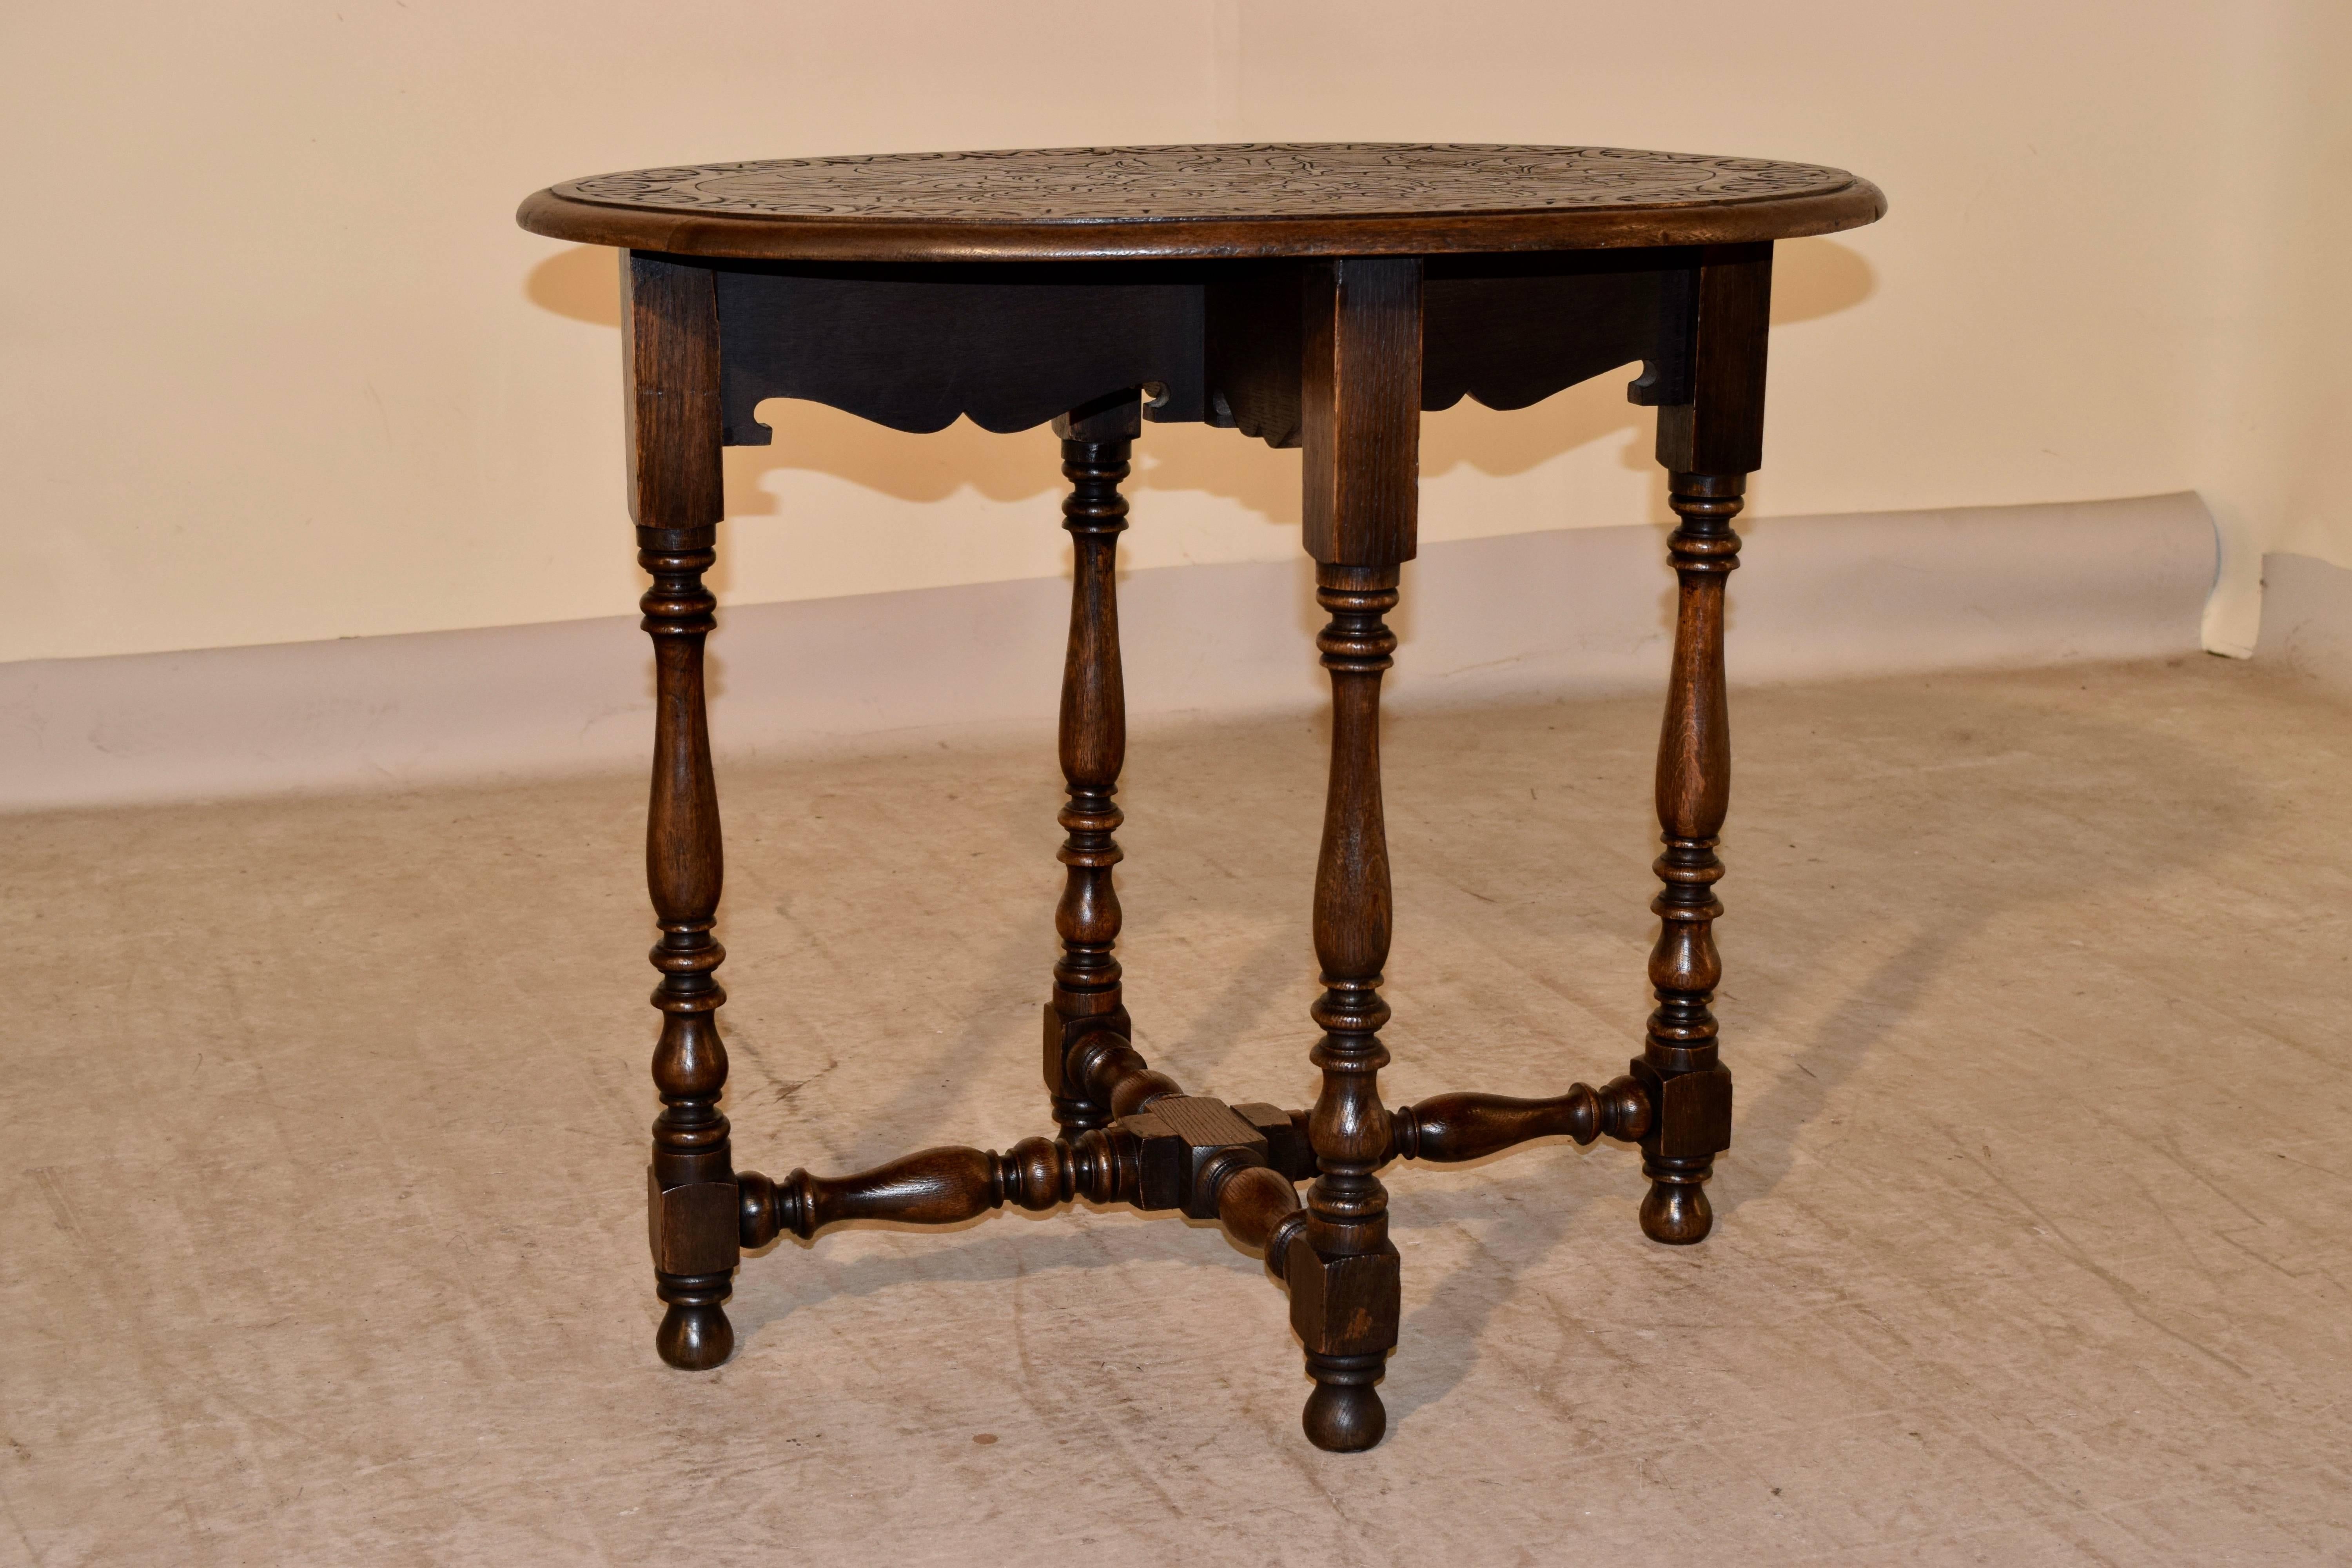 19th century oval oak side table from England. The top is carved in a leaf pattern on the top and has a carved decorated banded edge which is also beveled. The apron is scalloped, and has hand-turned legs joined by hand-turned cross stretchers.